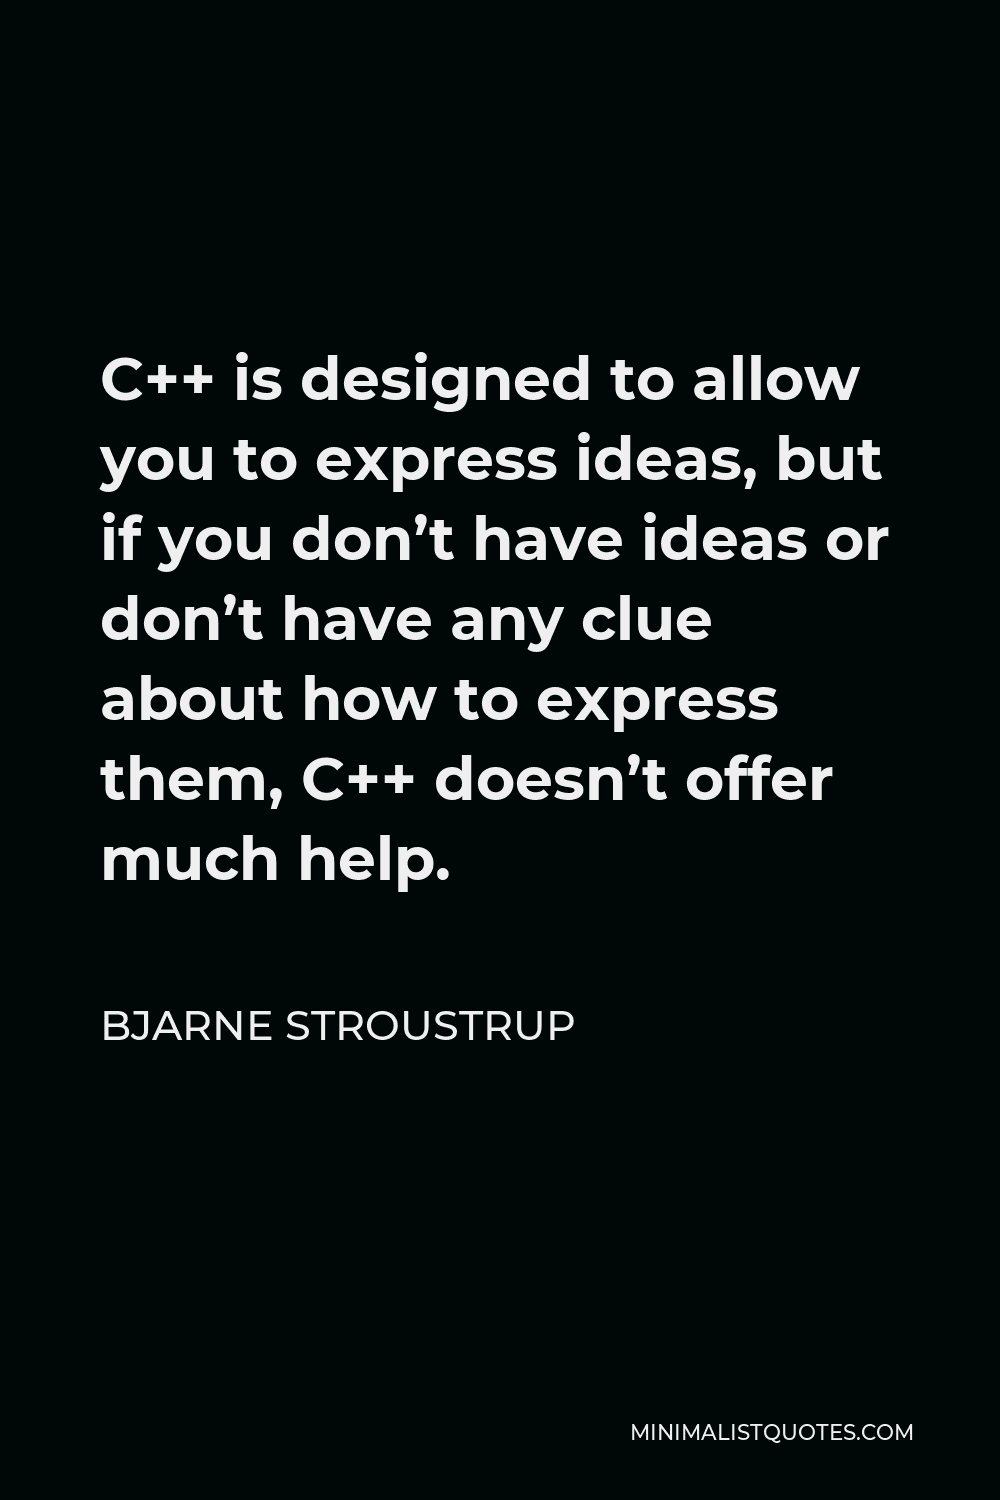 Bjarne Stroustrup Quote - C++ is designed to allow you to express ideas, but if you don’t have ideas or don’t have any clue about how to express them, C++ doesn’t offer much help.